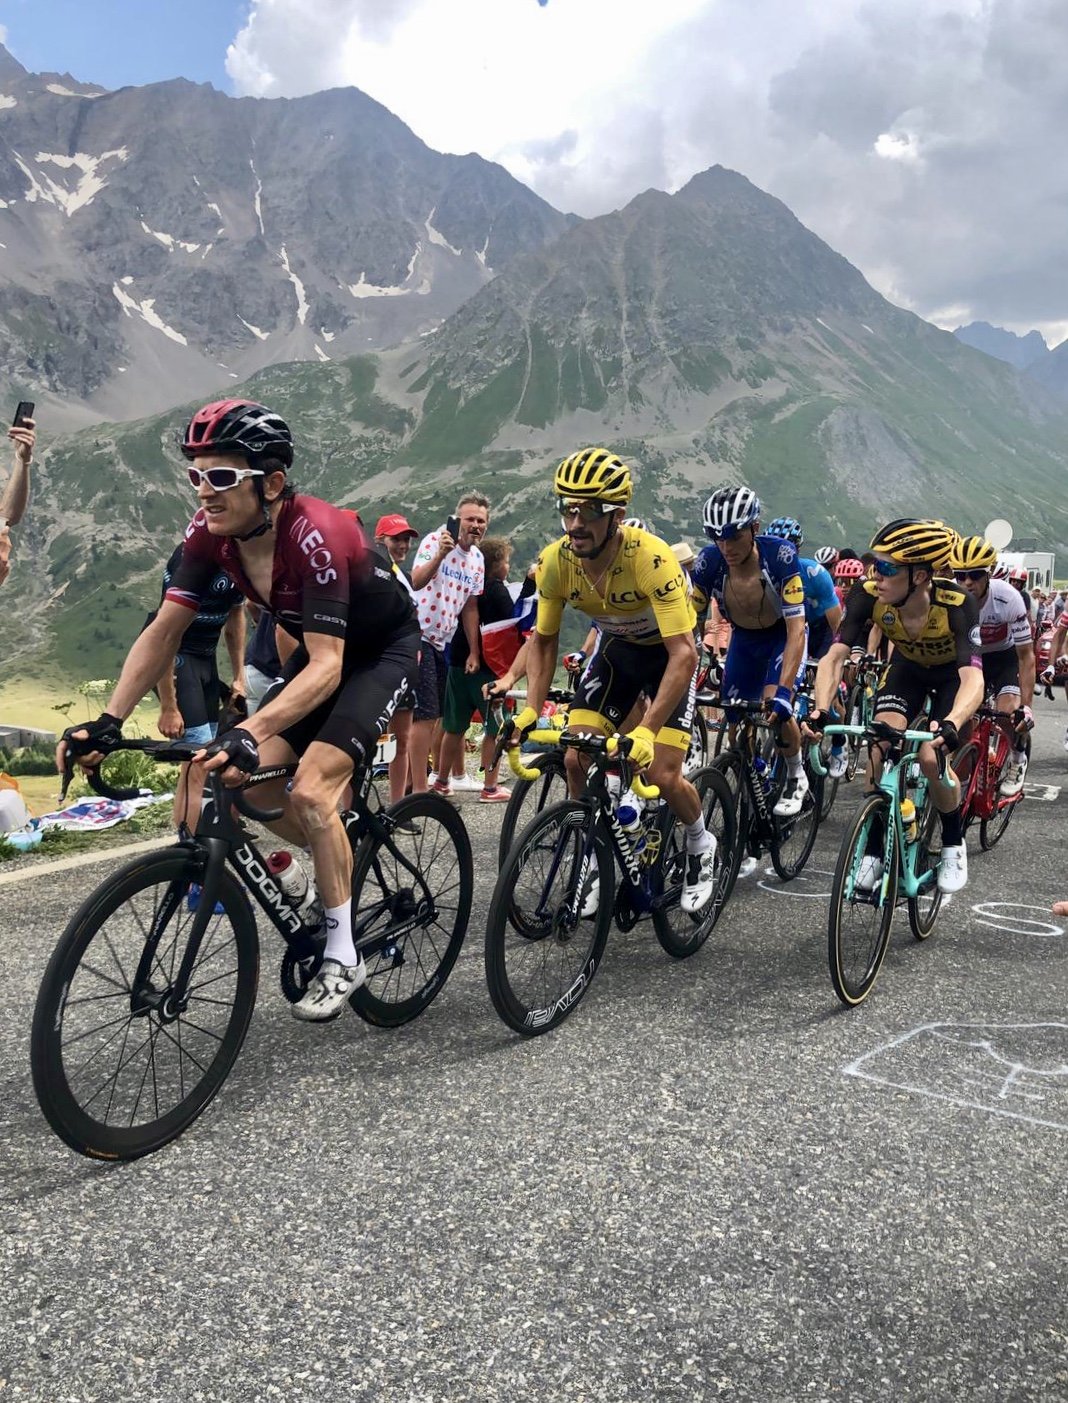 Tour de France 2019, Galibier, Geriant Thomas, Julian Alaphilippe, Team Ineos, Quickstep, road cycling